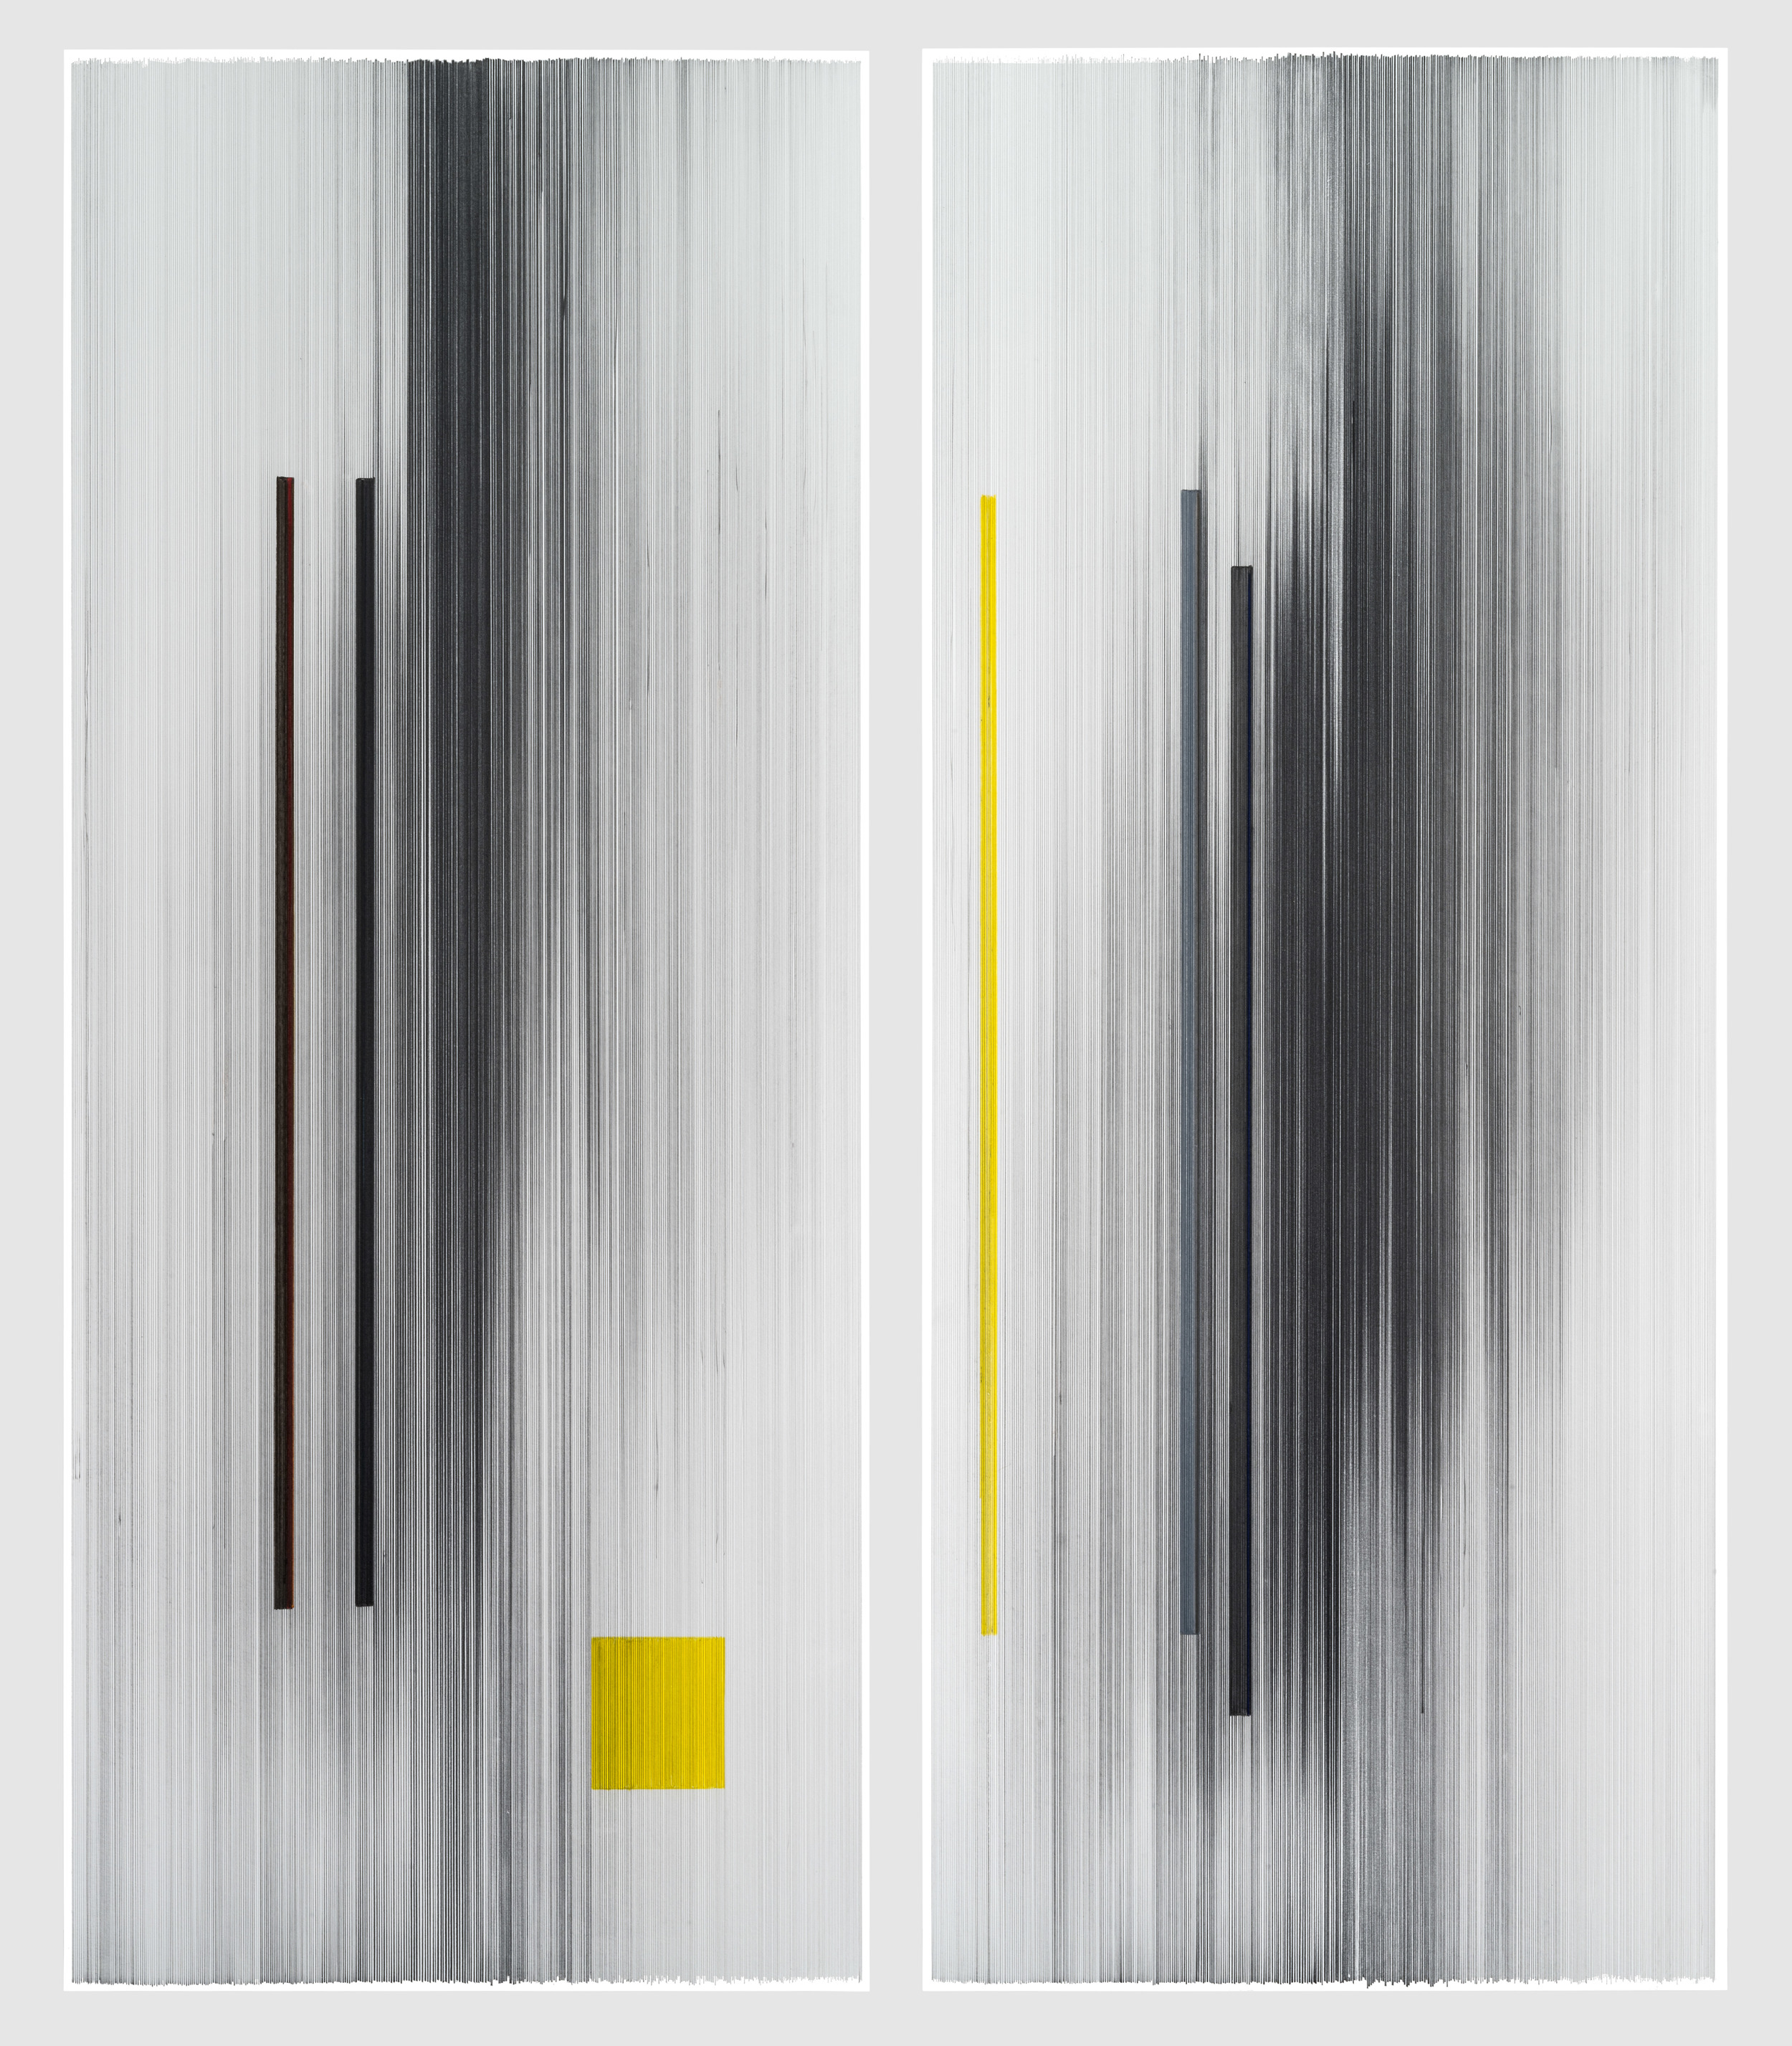    notations 15   2016 graphite and colored pencil on mat board 48 x 58 inches (two panels) 